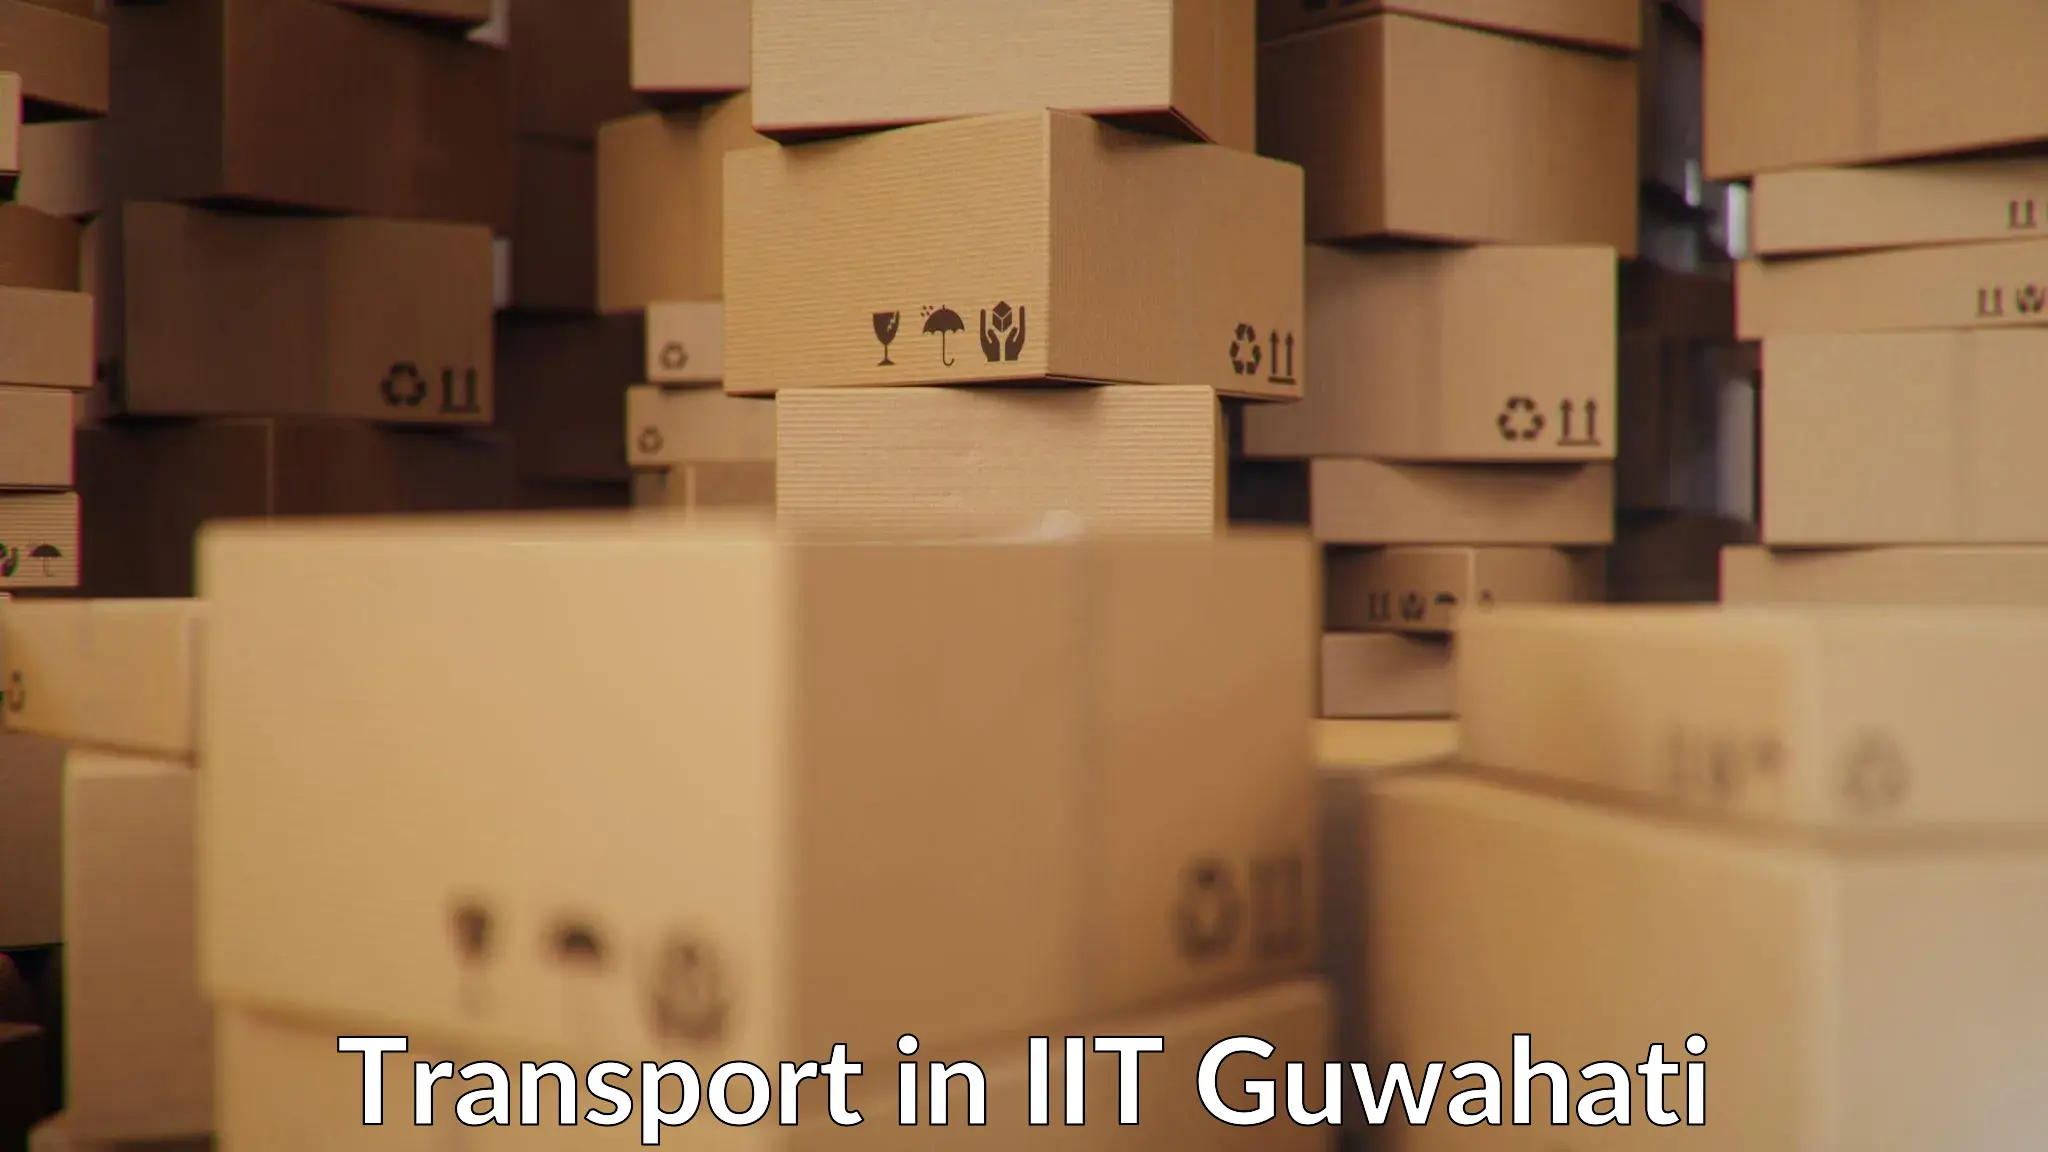 Commercial transport service in IIT Guwahati